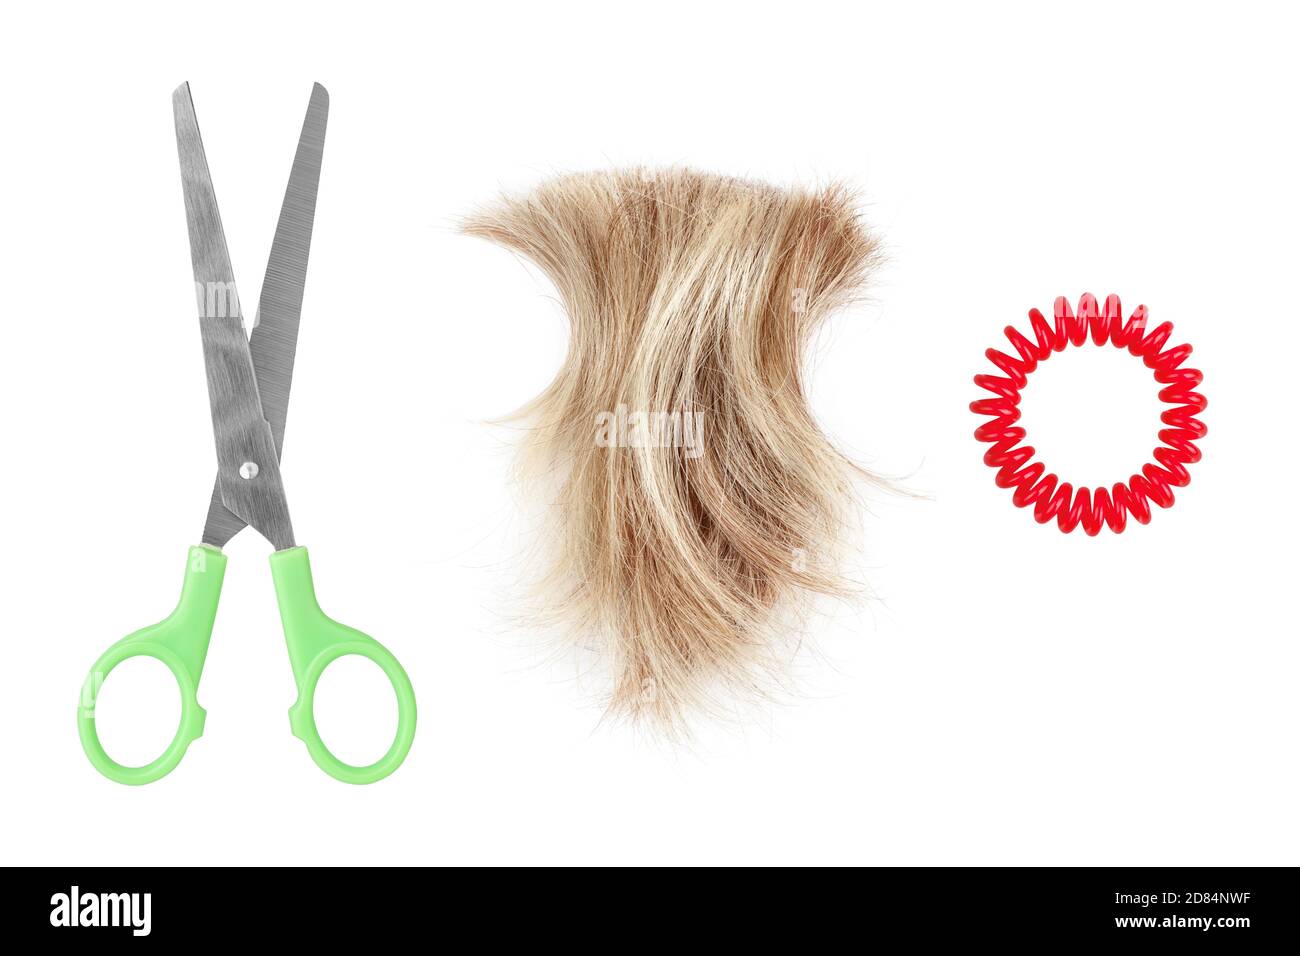 Blond hair lock, metal scissors, scrunchy white background isolated closeup, cut off blonde hair curl, steel shears, spiral hair band, hairstyle Stock Photo